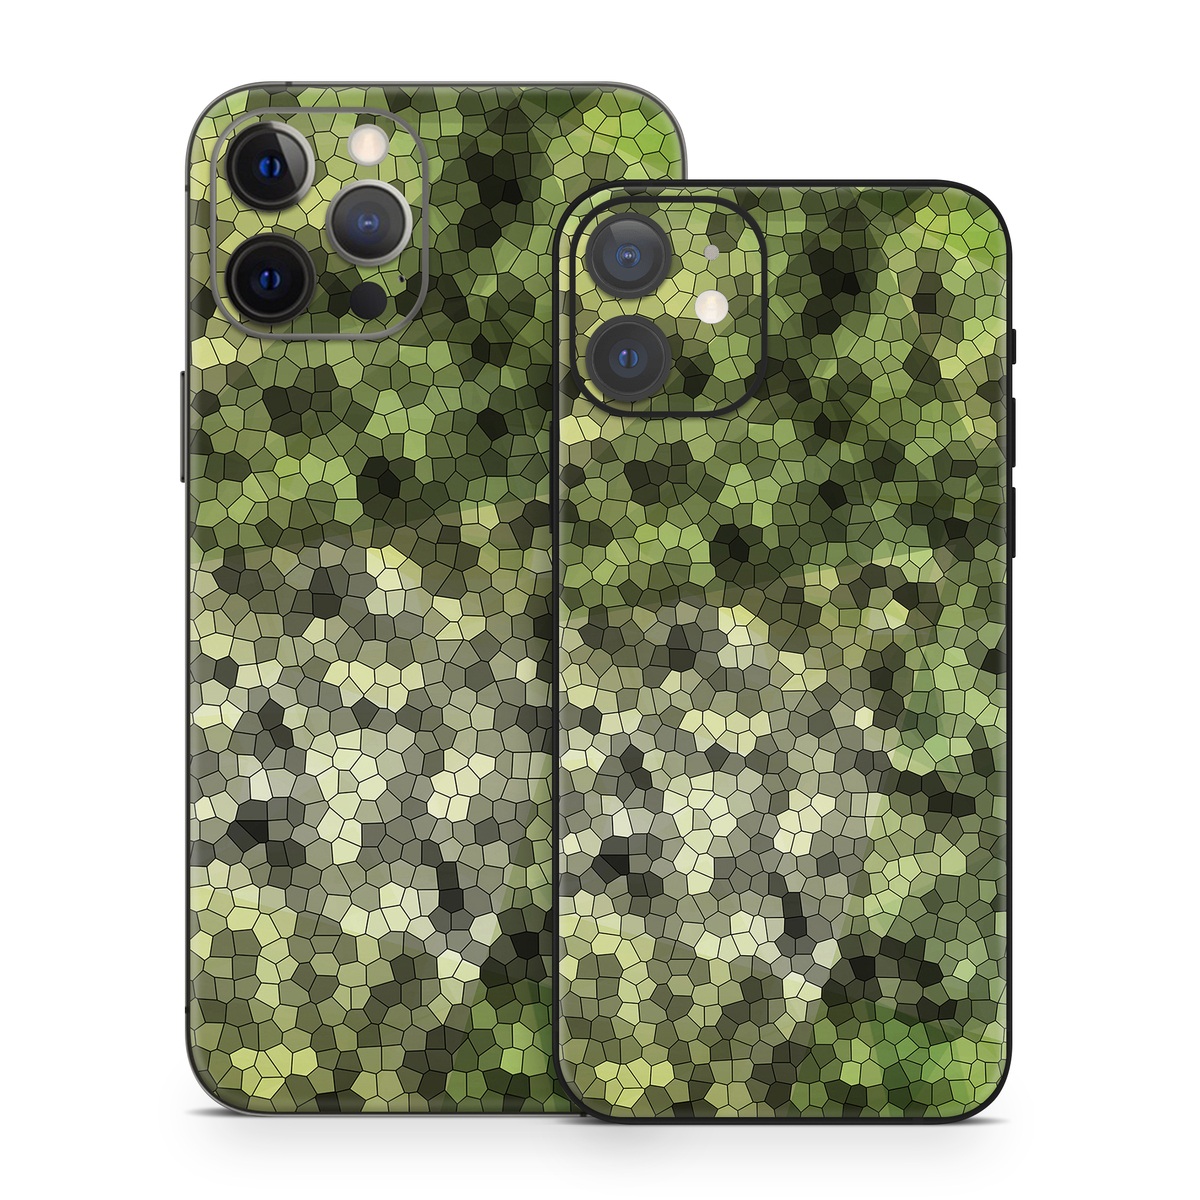 iPhone 12 Skin design of Green, Grass, Leaf, Plant, Pattern, Groundcover with black, white, green, gray colors